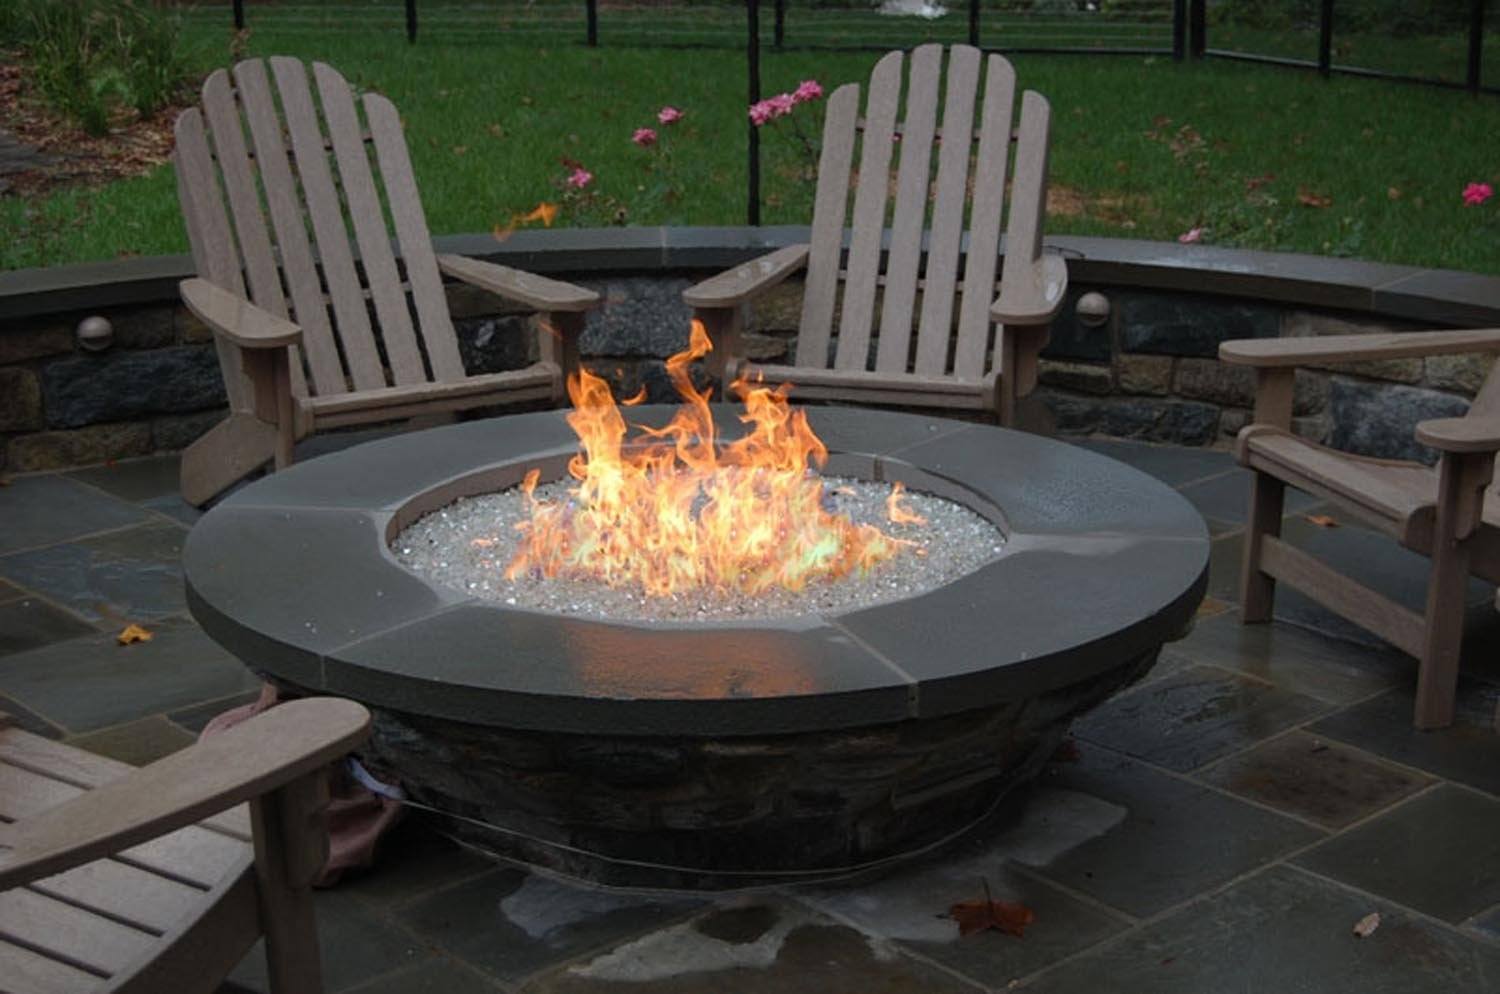 Gas Vs Wood Fire Pit Pros And Cons, Gas Fire Pit Or Wood Burning